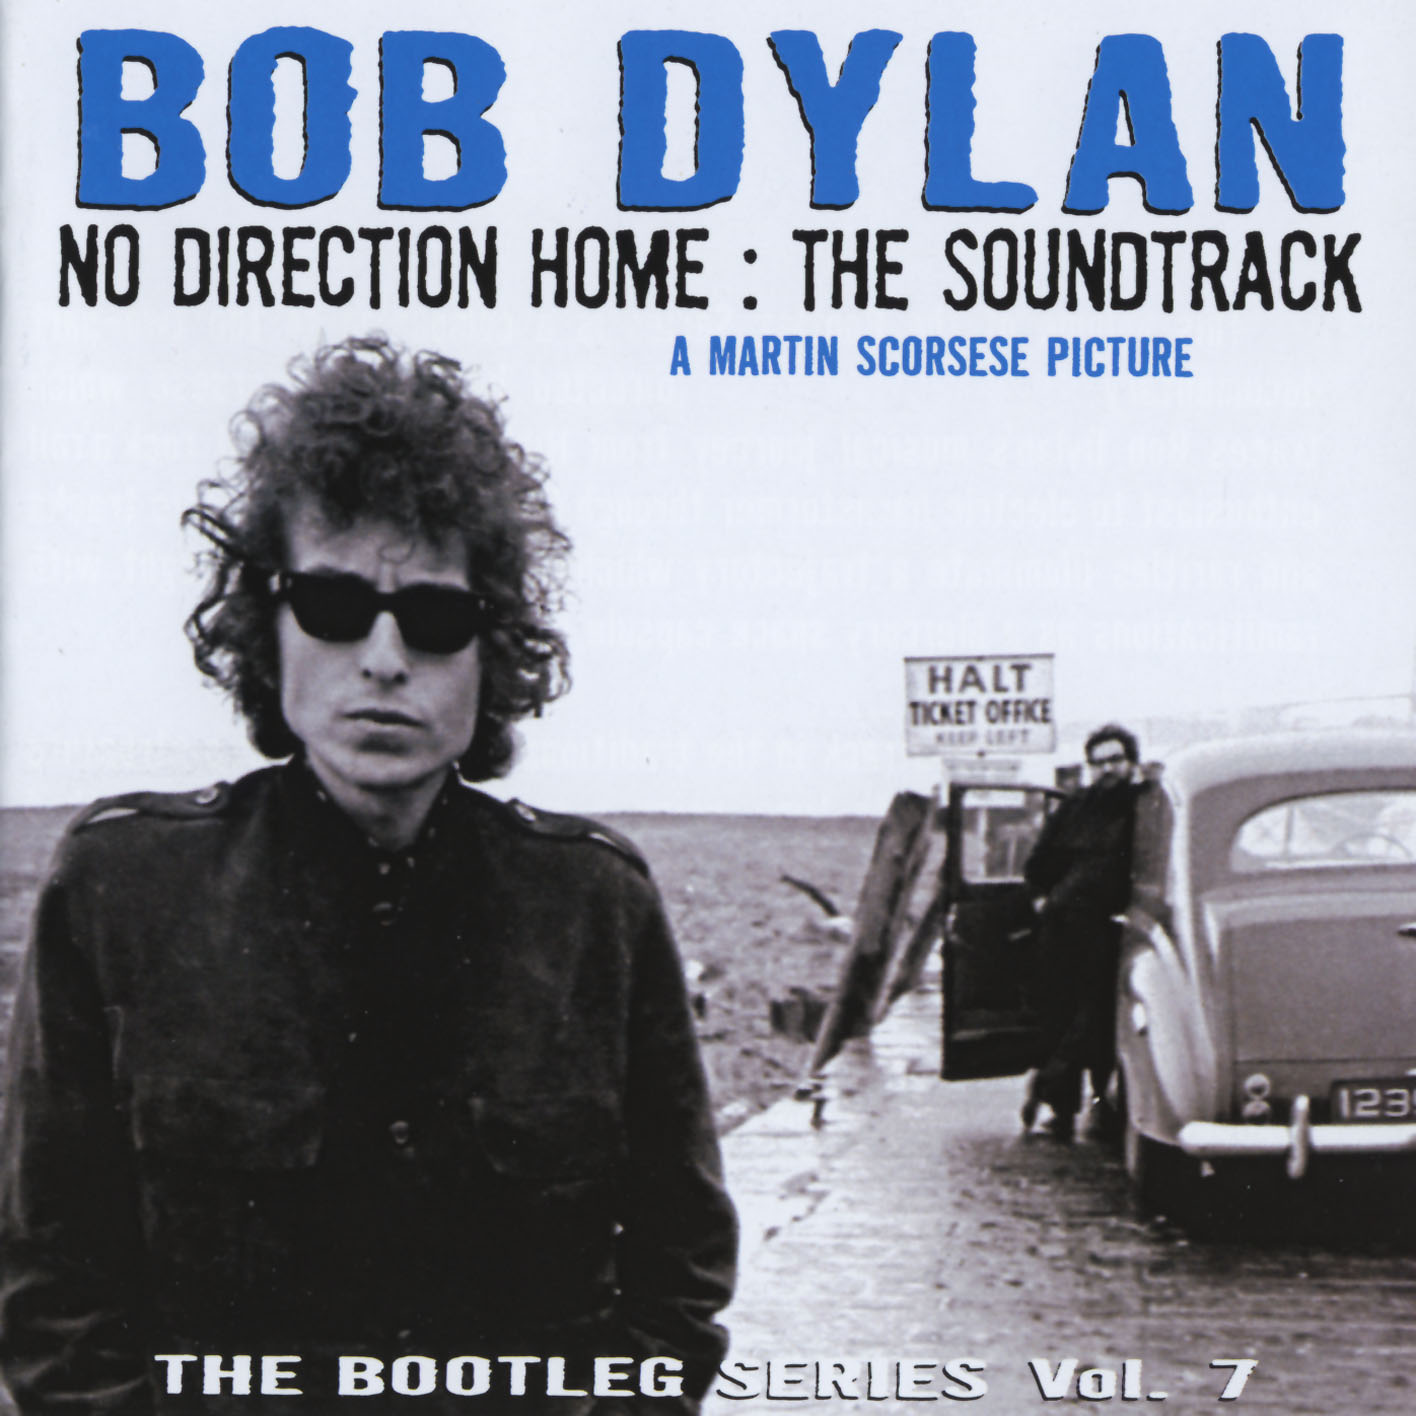 The Bootleg Series, Vol. 7 – No Direction Home: The Soundtrack